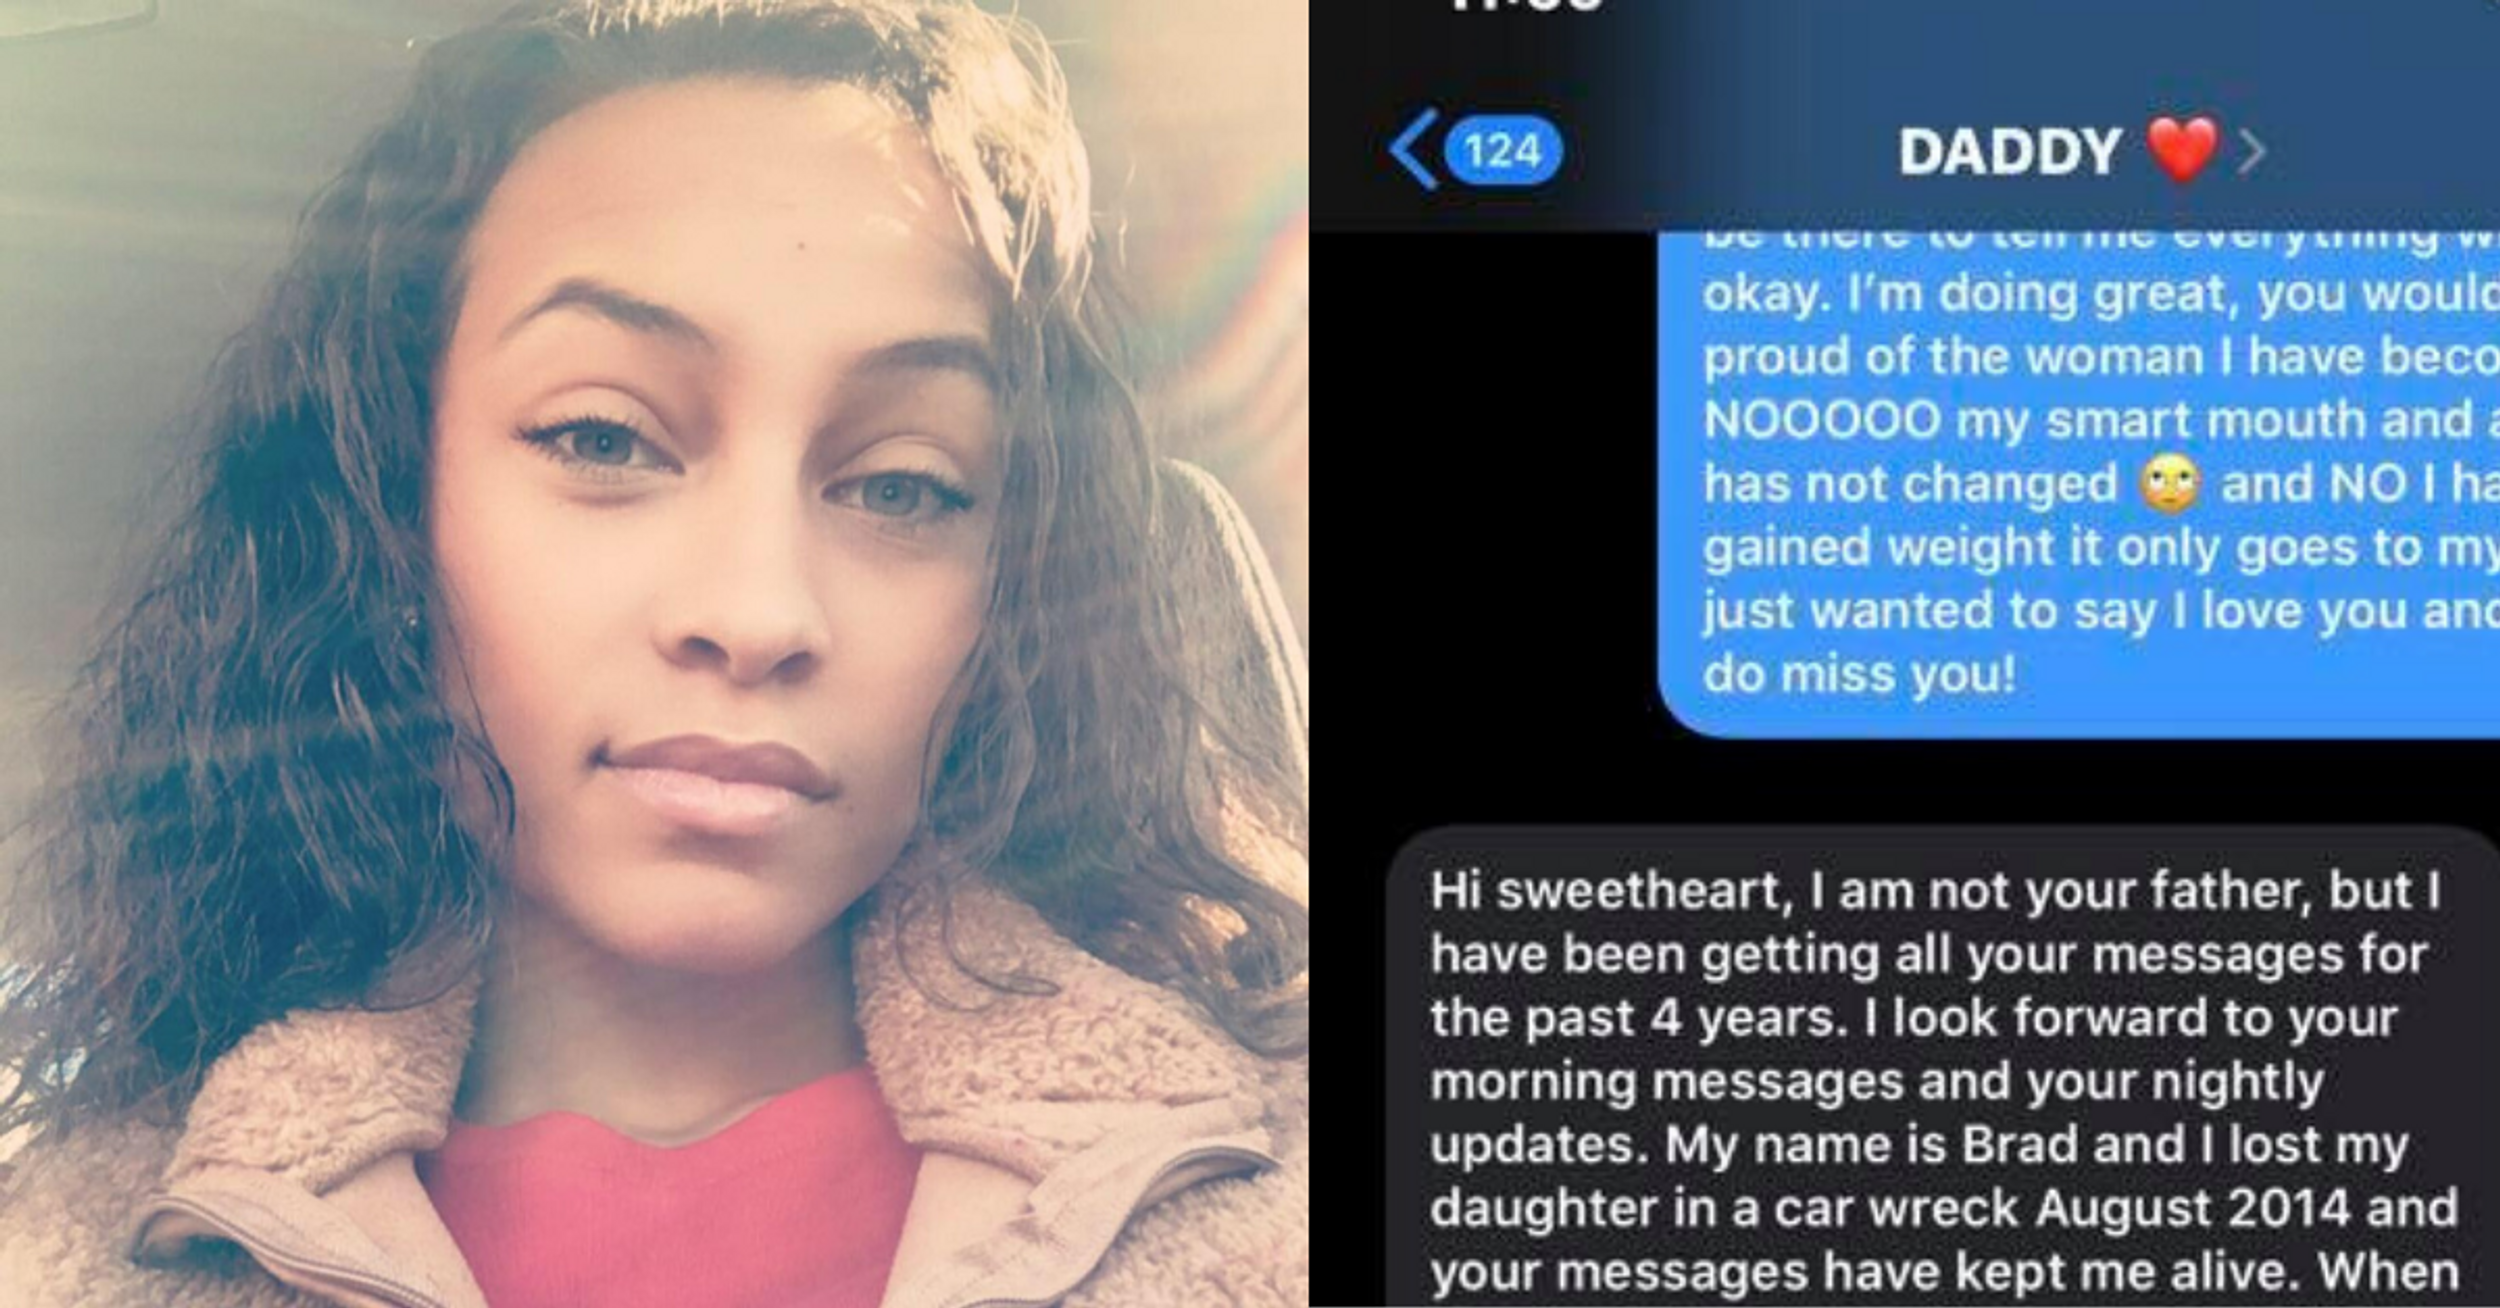 Woman Who Texted Her Dad Every Day For 4 Years After His Death Gets Unexpected, Emotional Response From Stranger